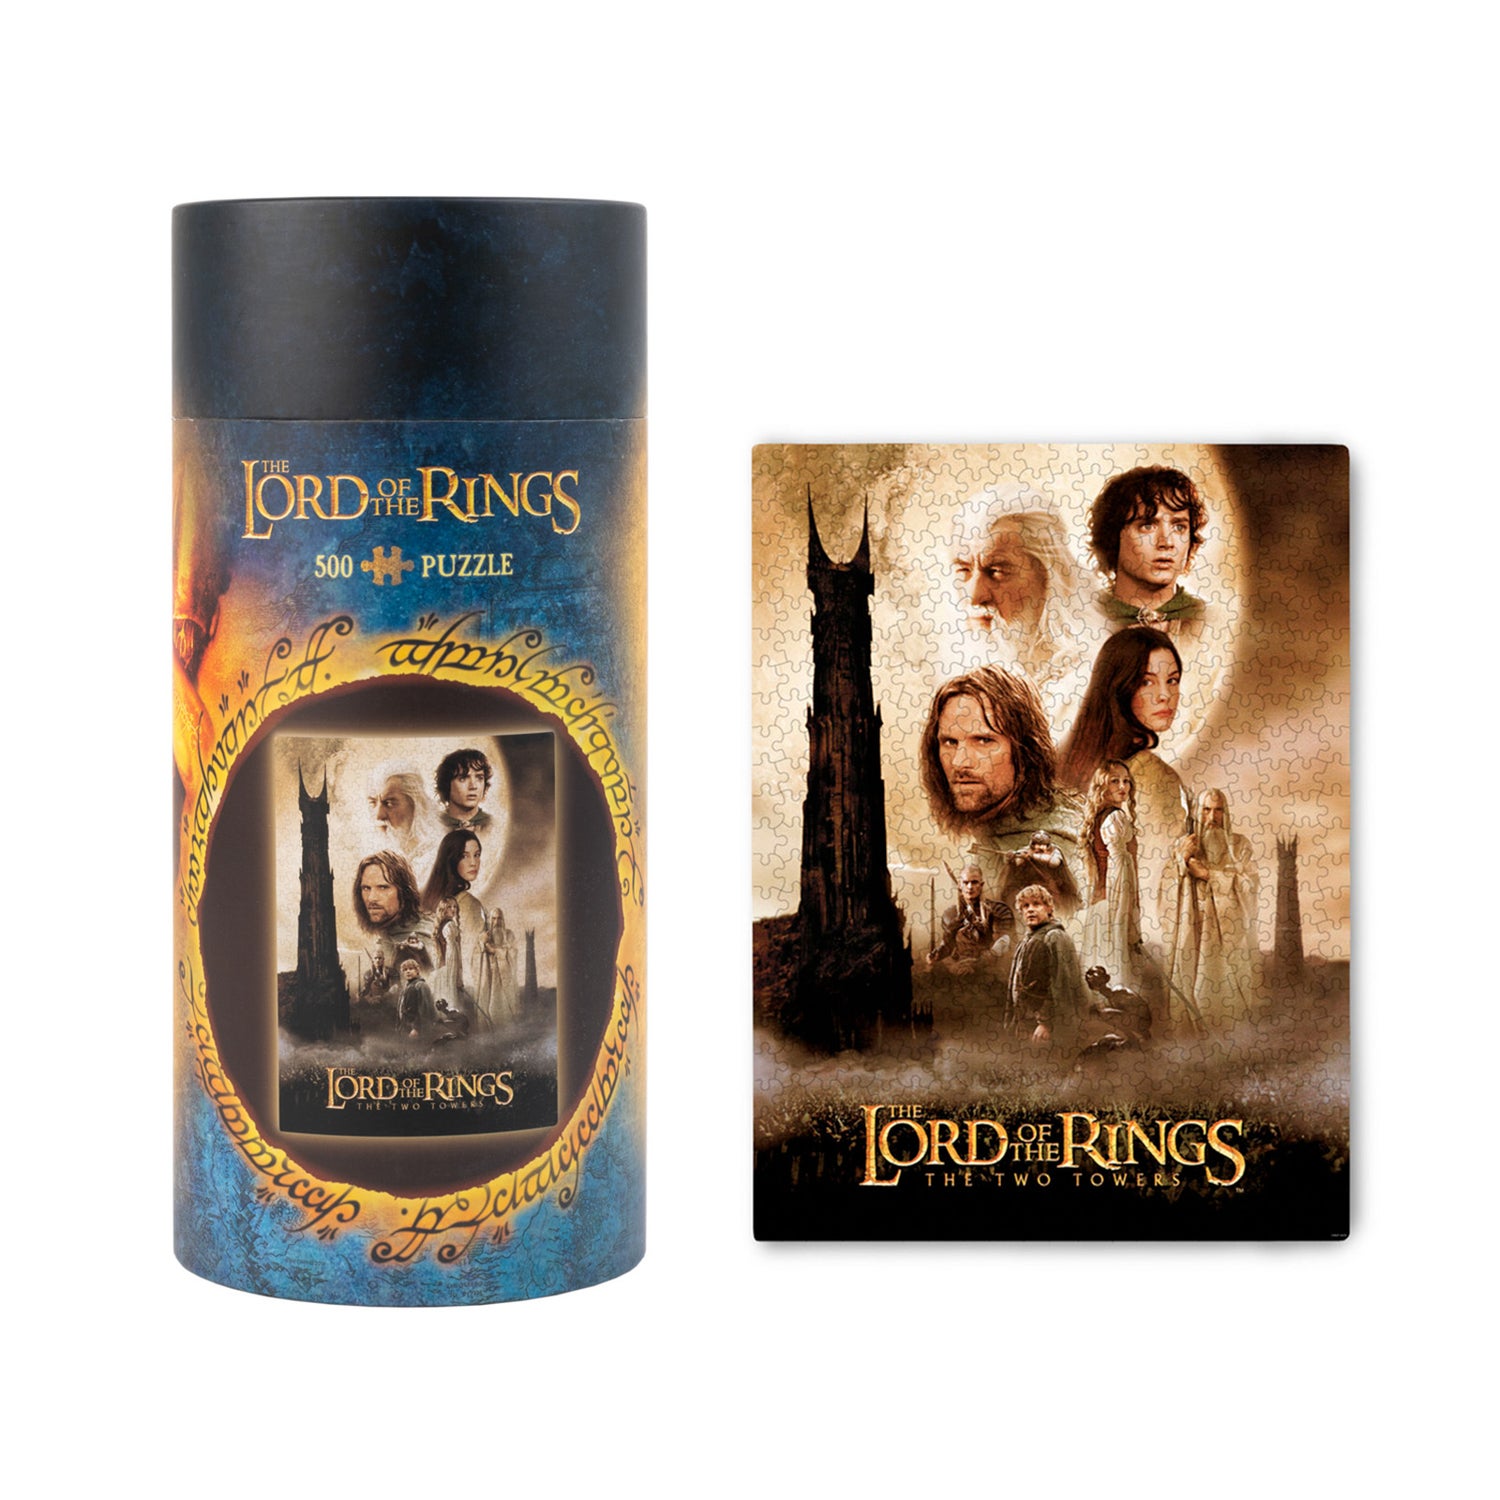 The Lord Of The Rings: The Two Towers 500 Pieces Puzzle